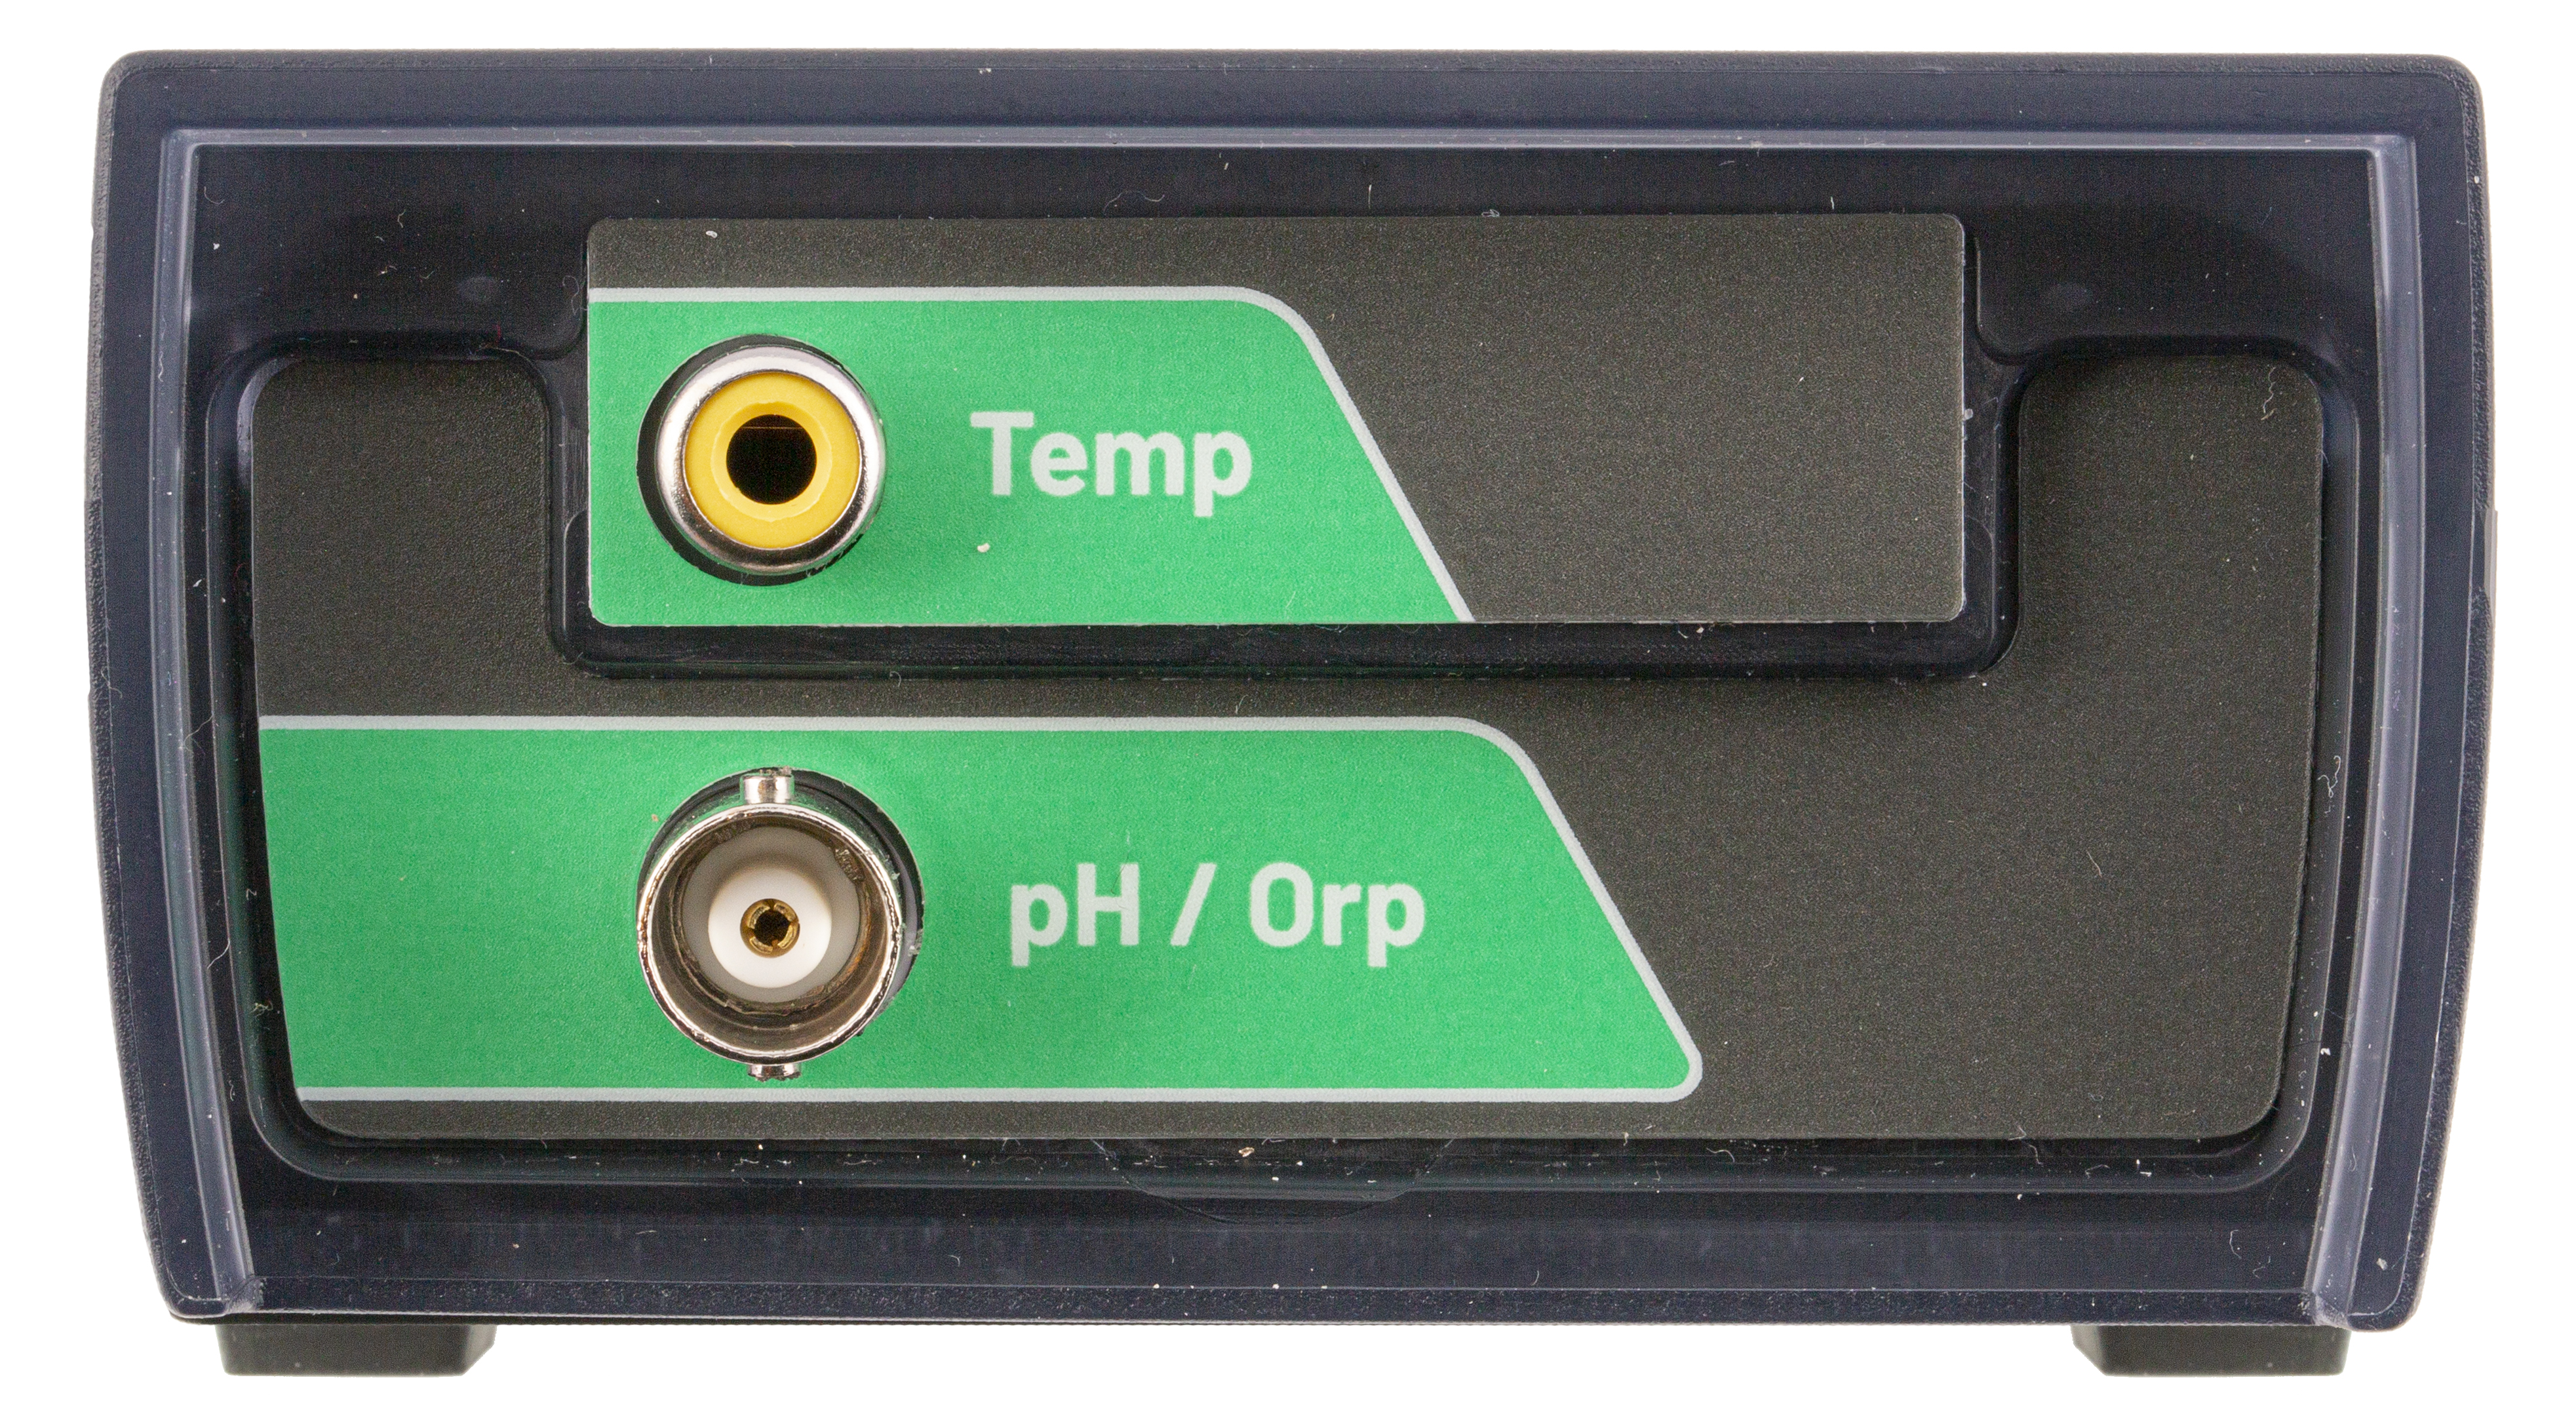 Professional pH/mV/ORP/Temperature handheld meter in carrying case including electrode